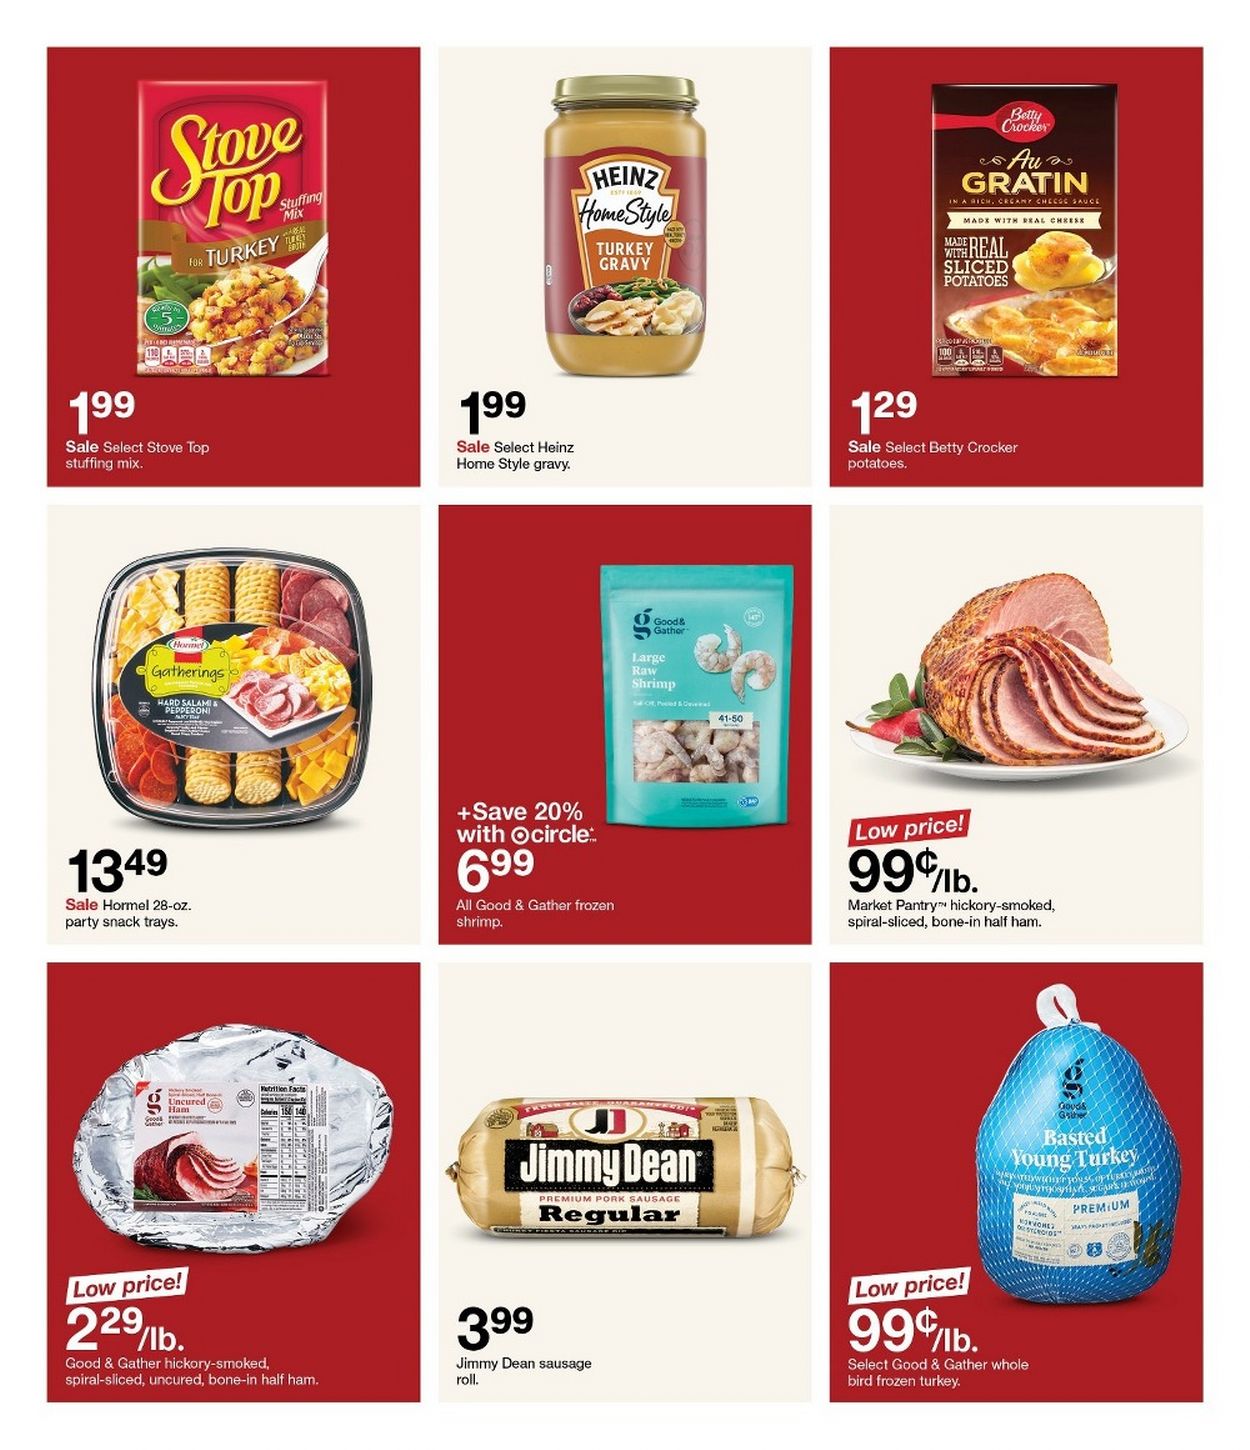 target weekly sales ad July 2024 Weekly Sales, Deals, Discounts and Digital Coupons.